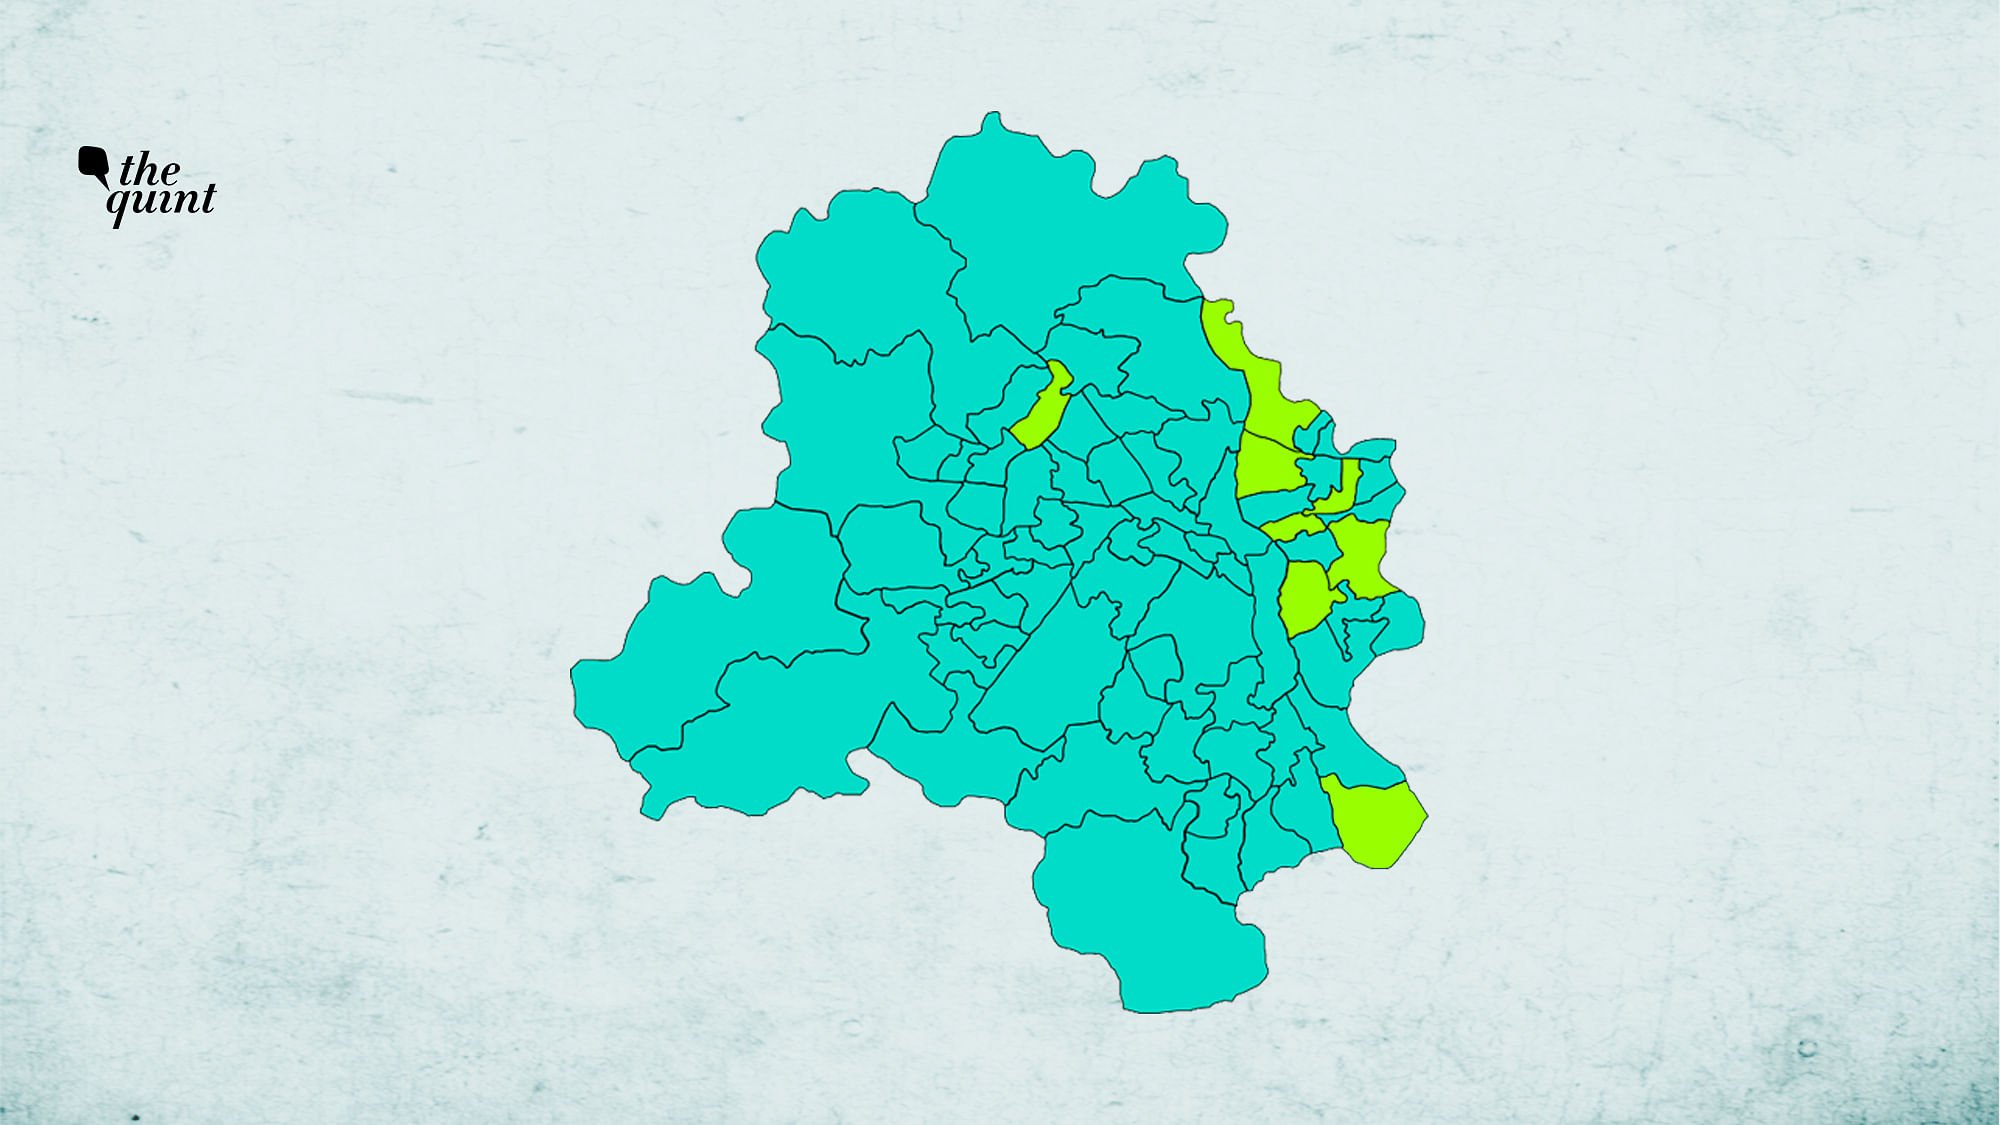 Swipe to see how Delhi’s political map has changed from 2015 to 2020.&nbsp;